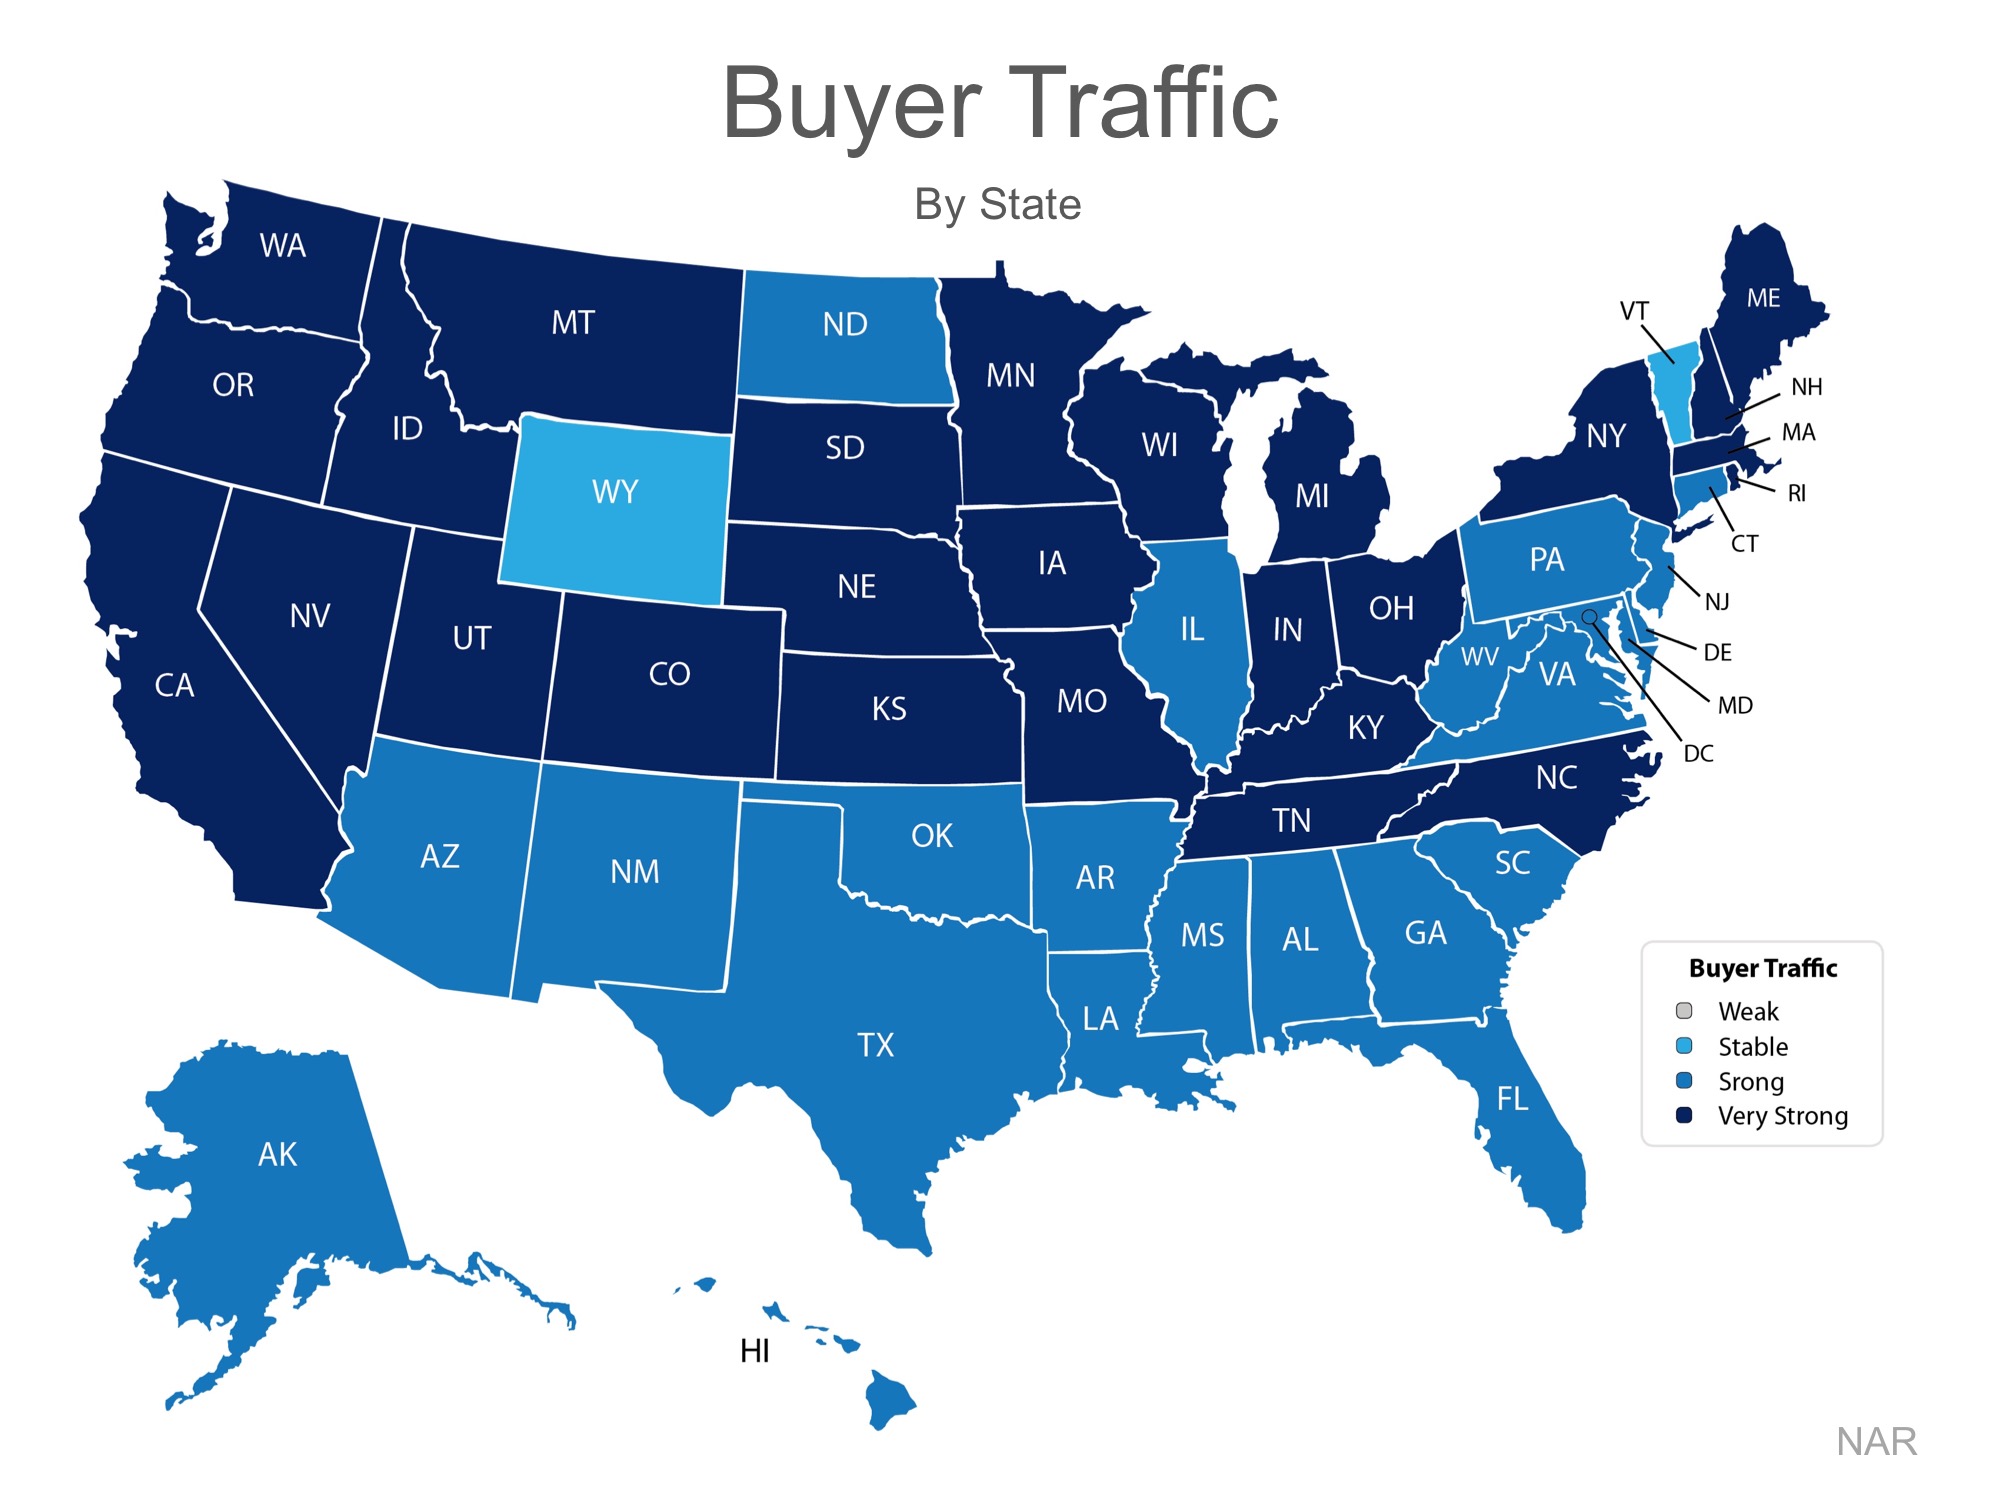 NAR Data Shows Now Is a Great Time to Sell! | MyKCM